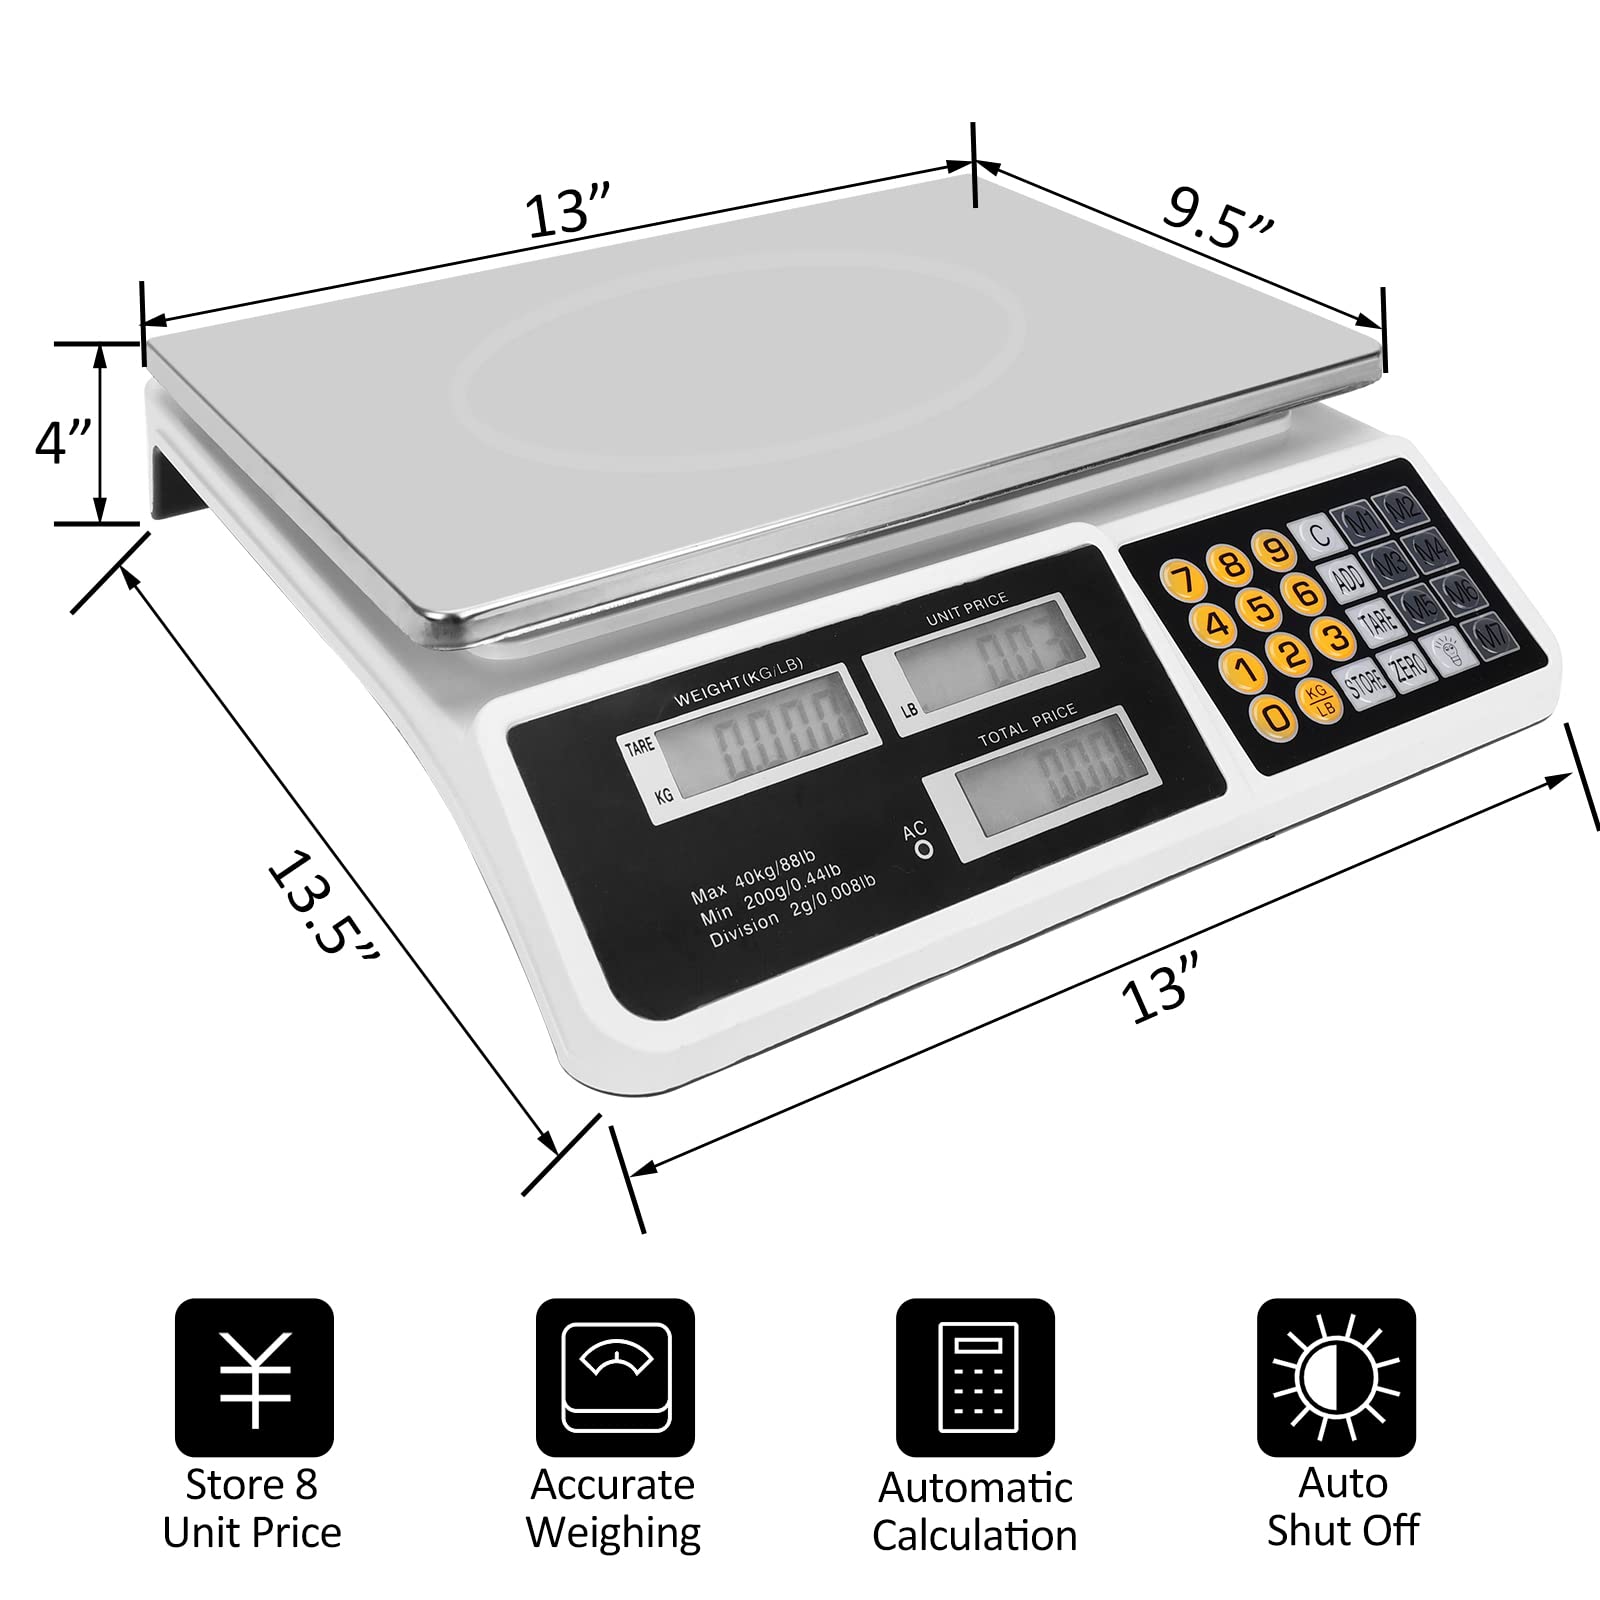 Digital Commercial Price Scale 88lb/40kg Price Computing Scale, Food Produce Counting Weight Scale with Dual LCD Display for Farmers Market, Retail Outlets, Meat Shop, Deli